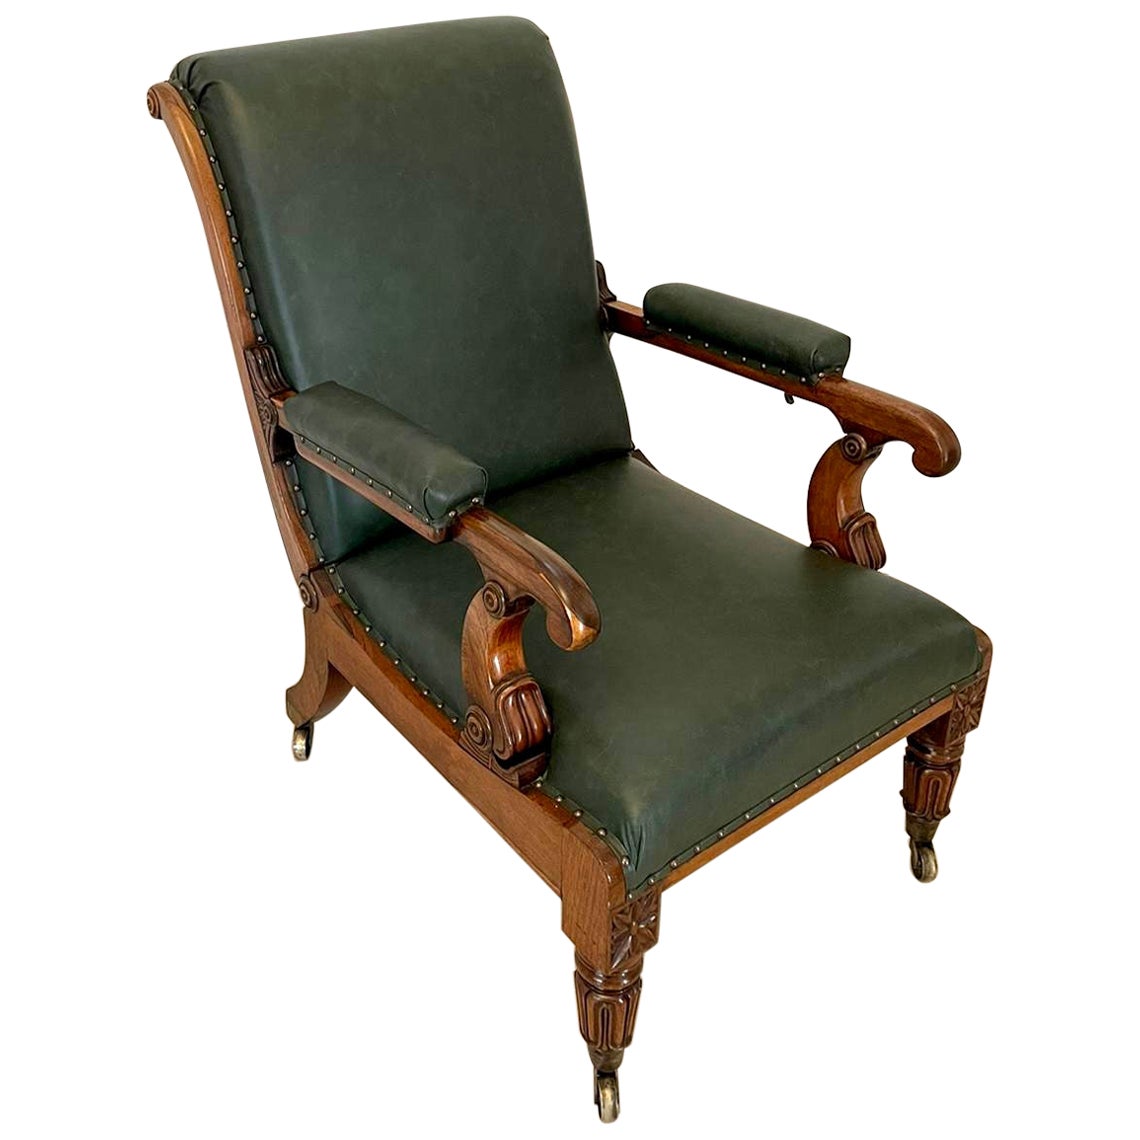 Outstanding Quality Antique Regency Quality Rosewood Reclining Armchair For Sale